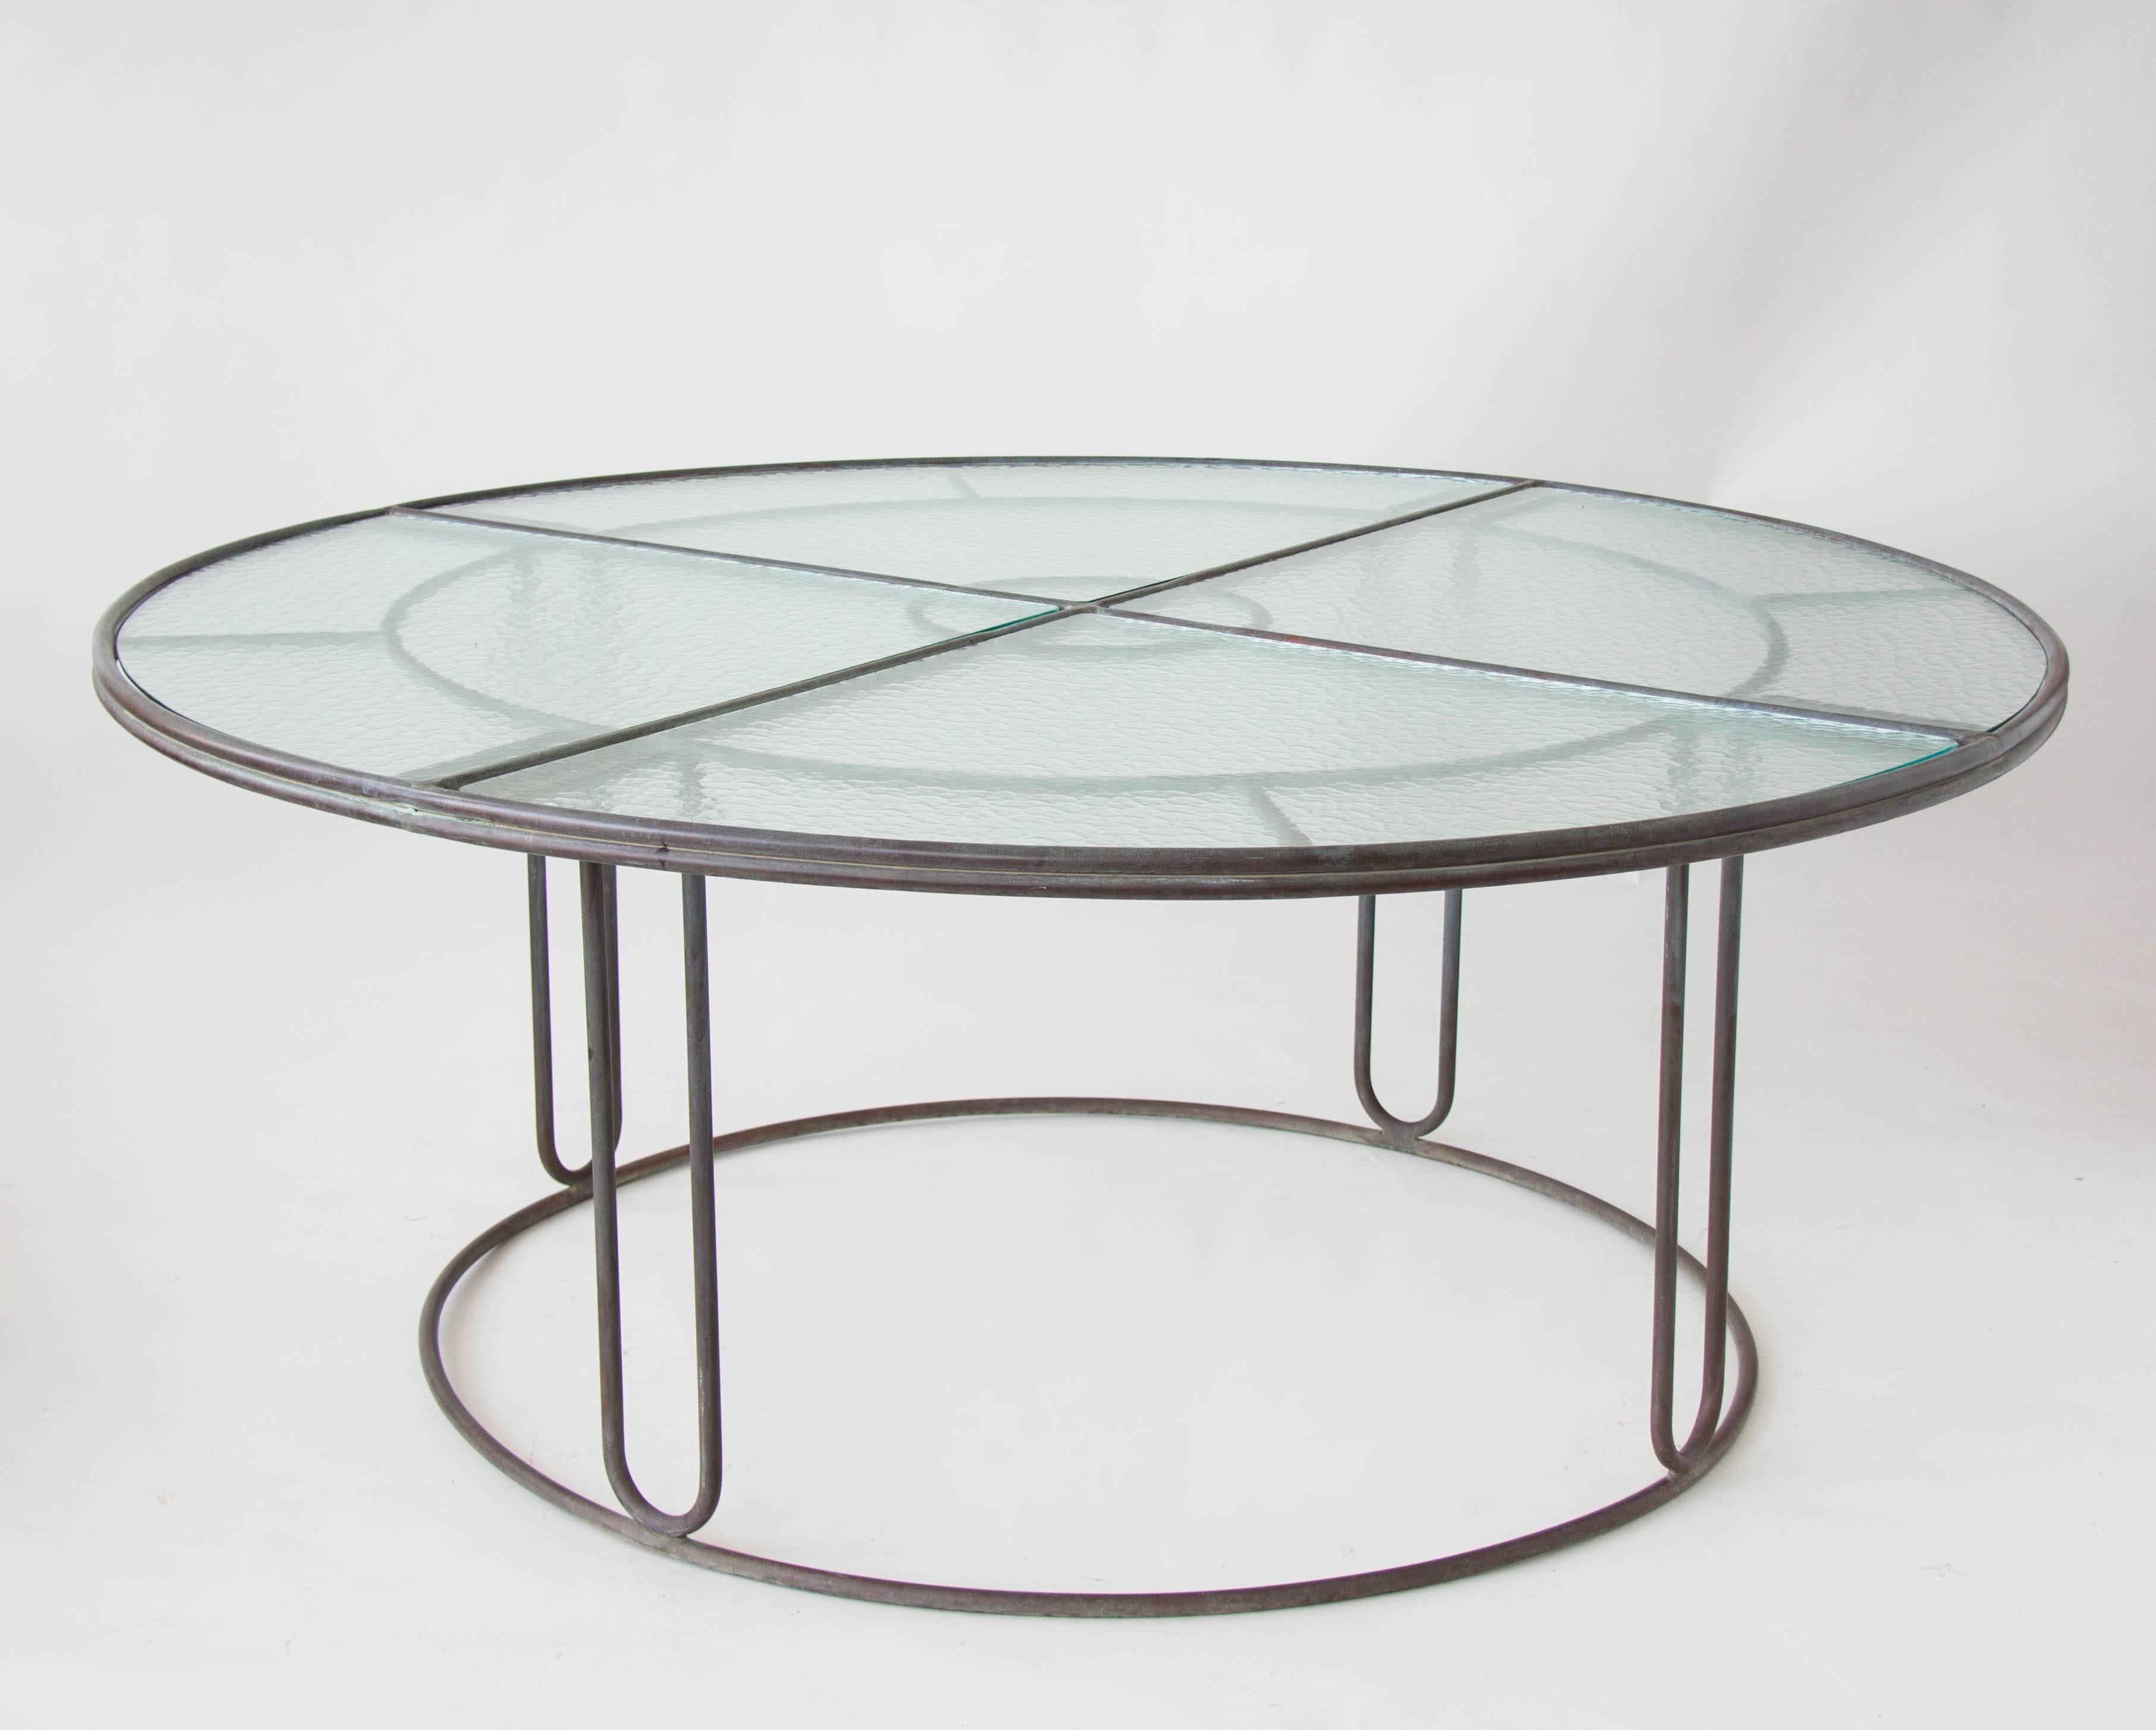 A patio dining table in patinated bronze designed by Walter Lamb and produced by Brown Jordan. The monumental piece has a quartered frame of bronze with two concentric rings and radial supports and a circular bronze base. Hairpin legs join the